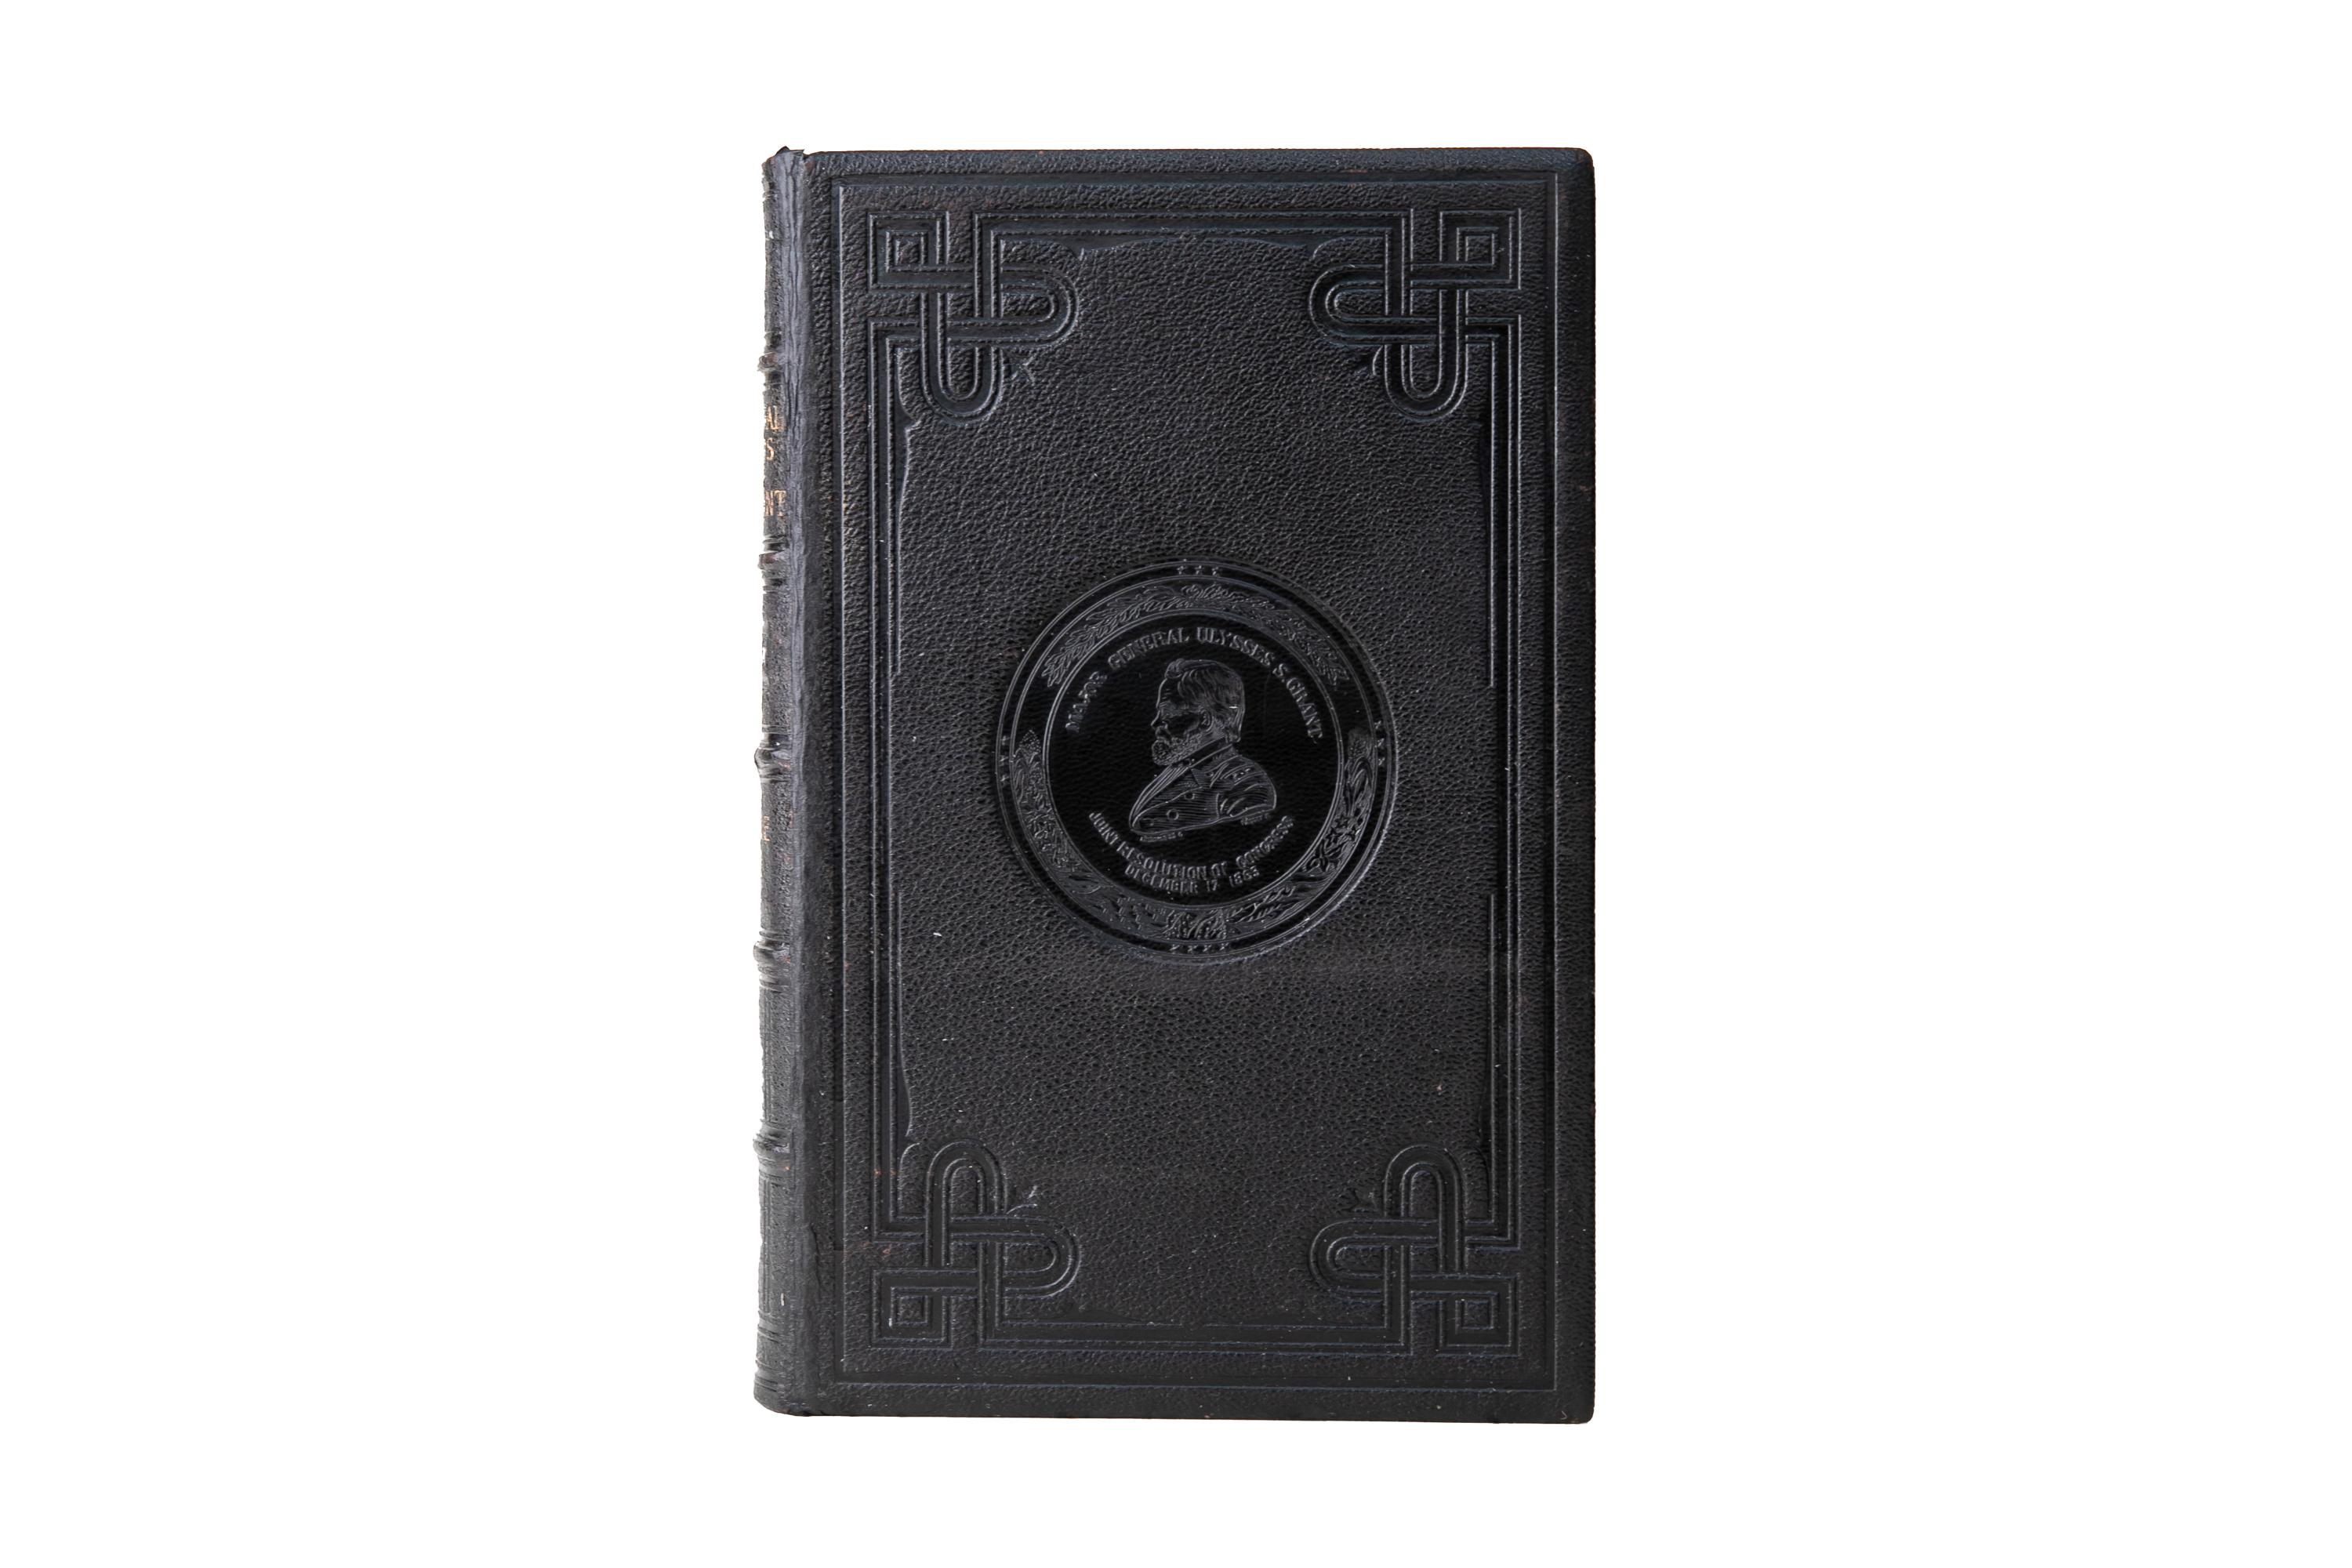 2 Volumes. U.S. Grant, Personal Memoirs. First Edition. Rare publisher's binding in full black morocco with the covers displaying ornate open-tooled detailing with Grant's crest and the raised band spines displaying open and gilt-tooled detailing.